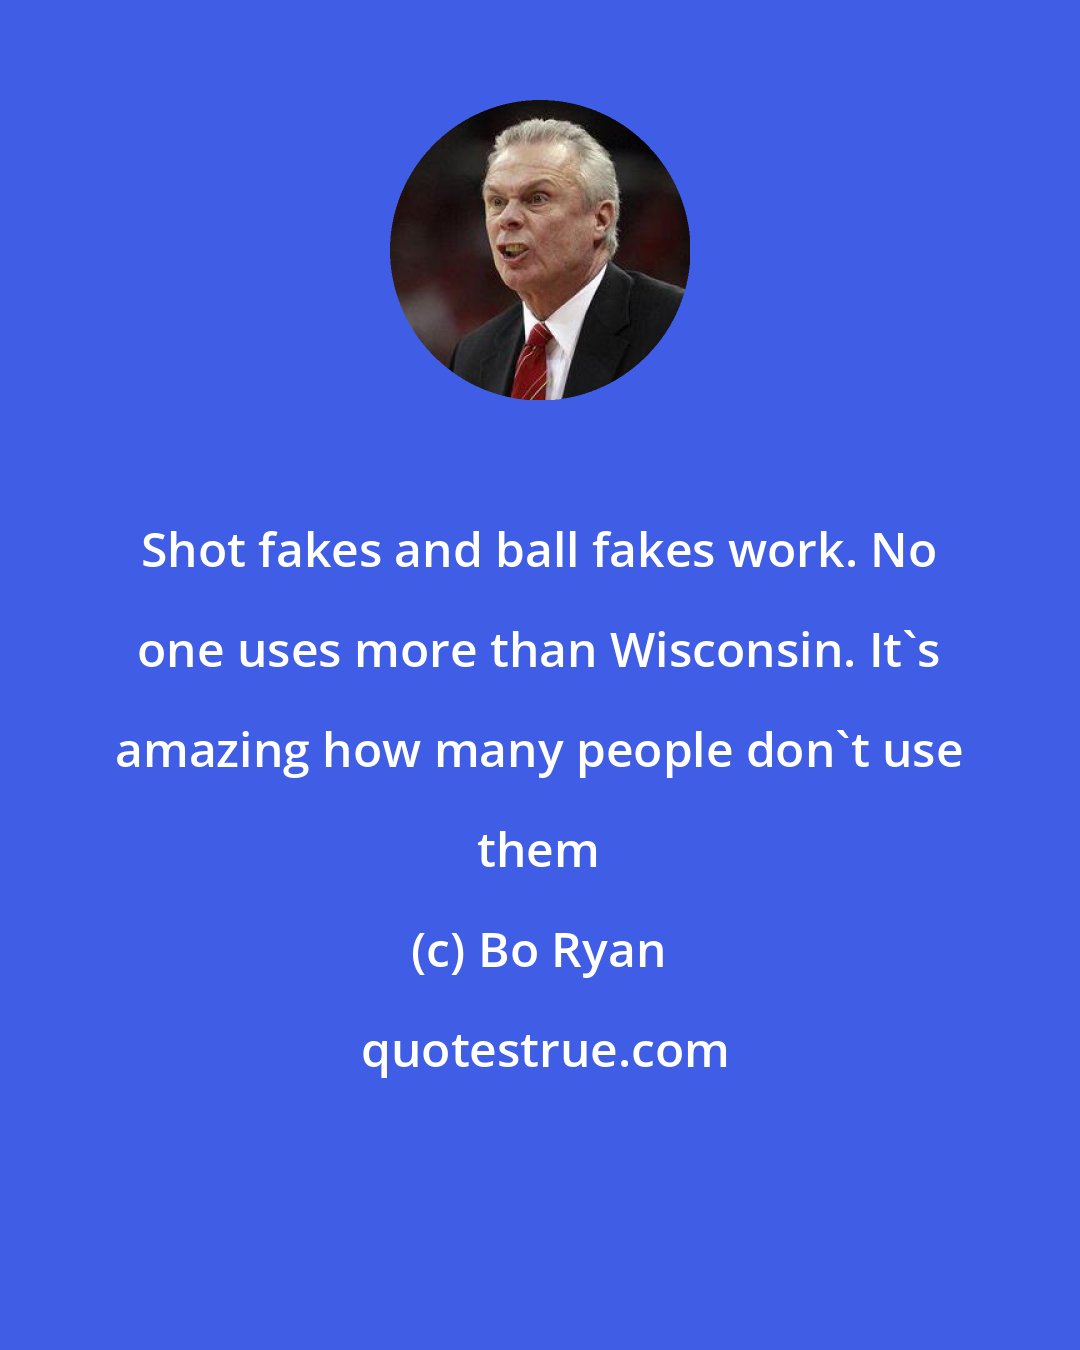 Bo Ryan: Shot fakes and ball fakes work. No one uses more than Wisconsin. It's amazing how many people don't use them